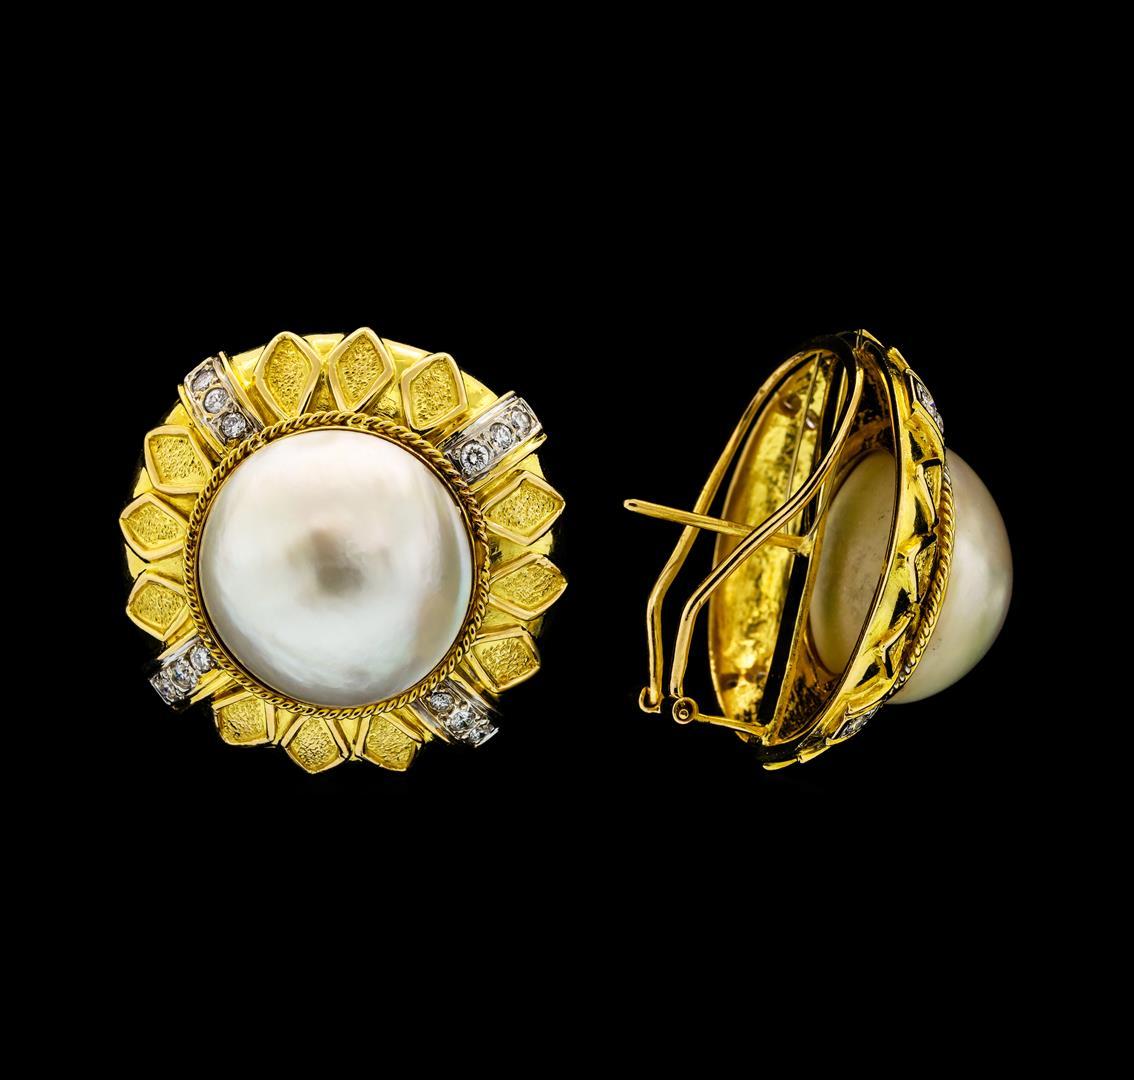 0.58 ctw Diamond and Pearl Earrings - 18KT Yellow Gold